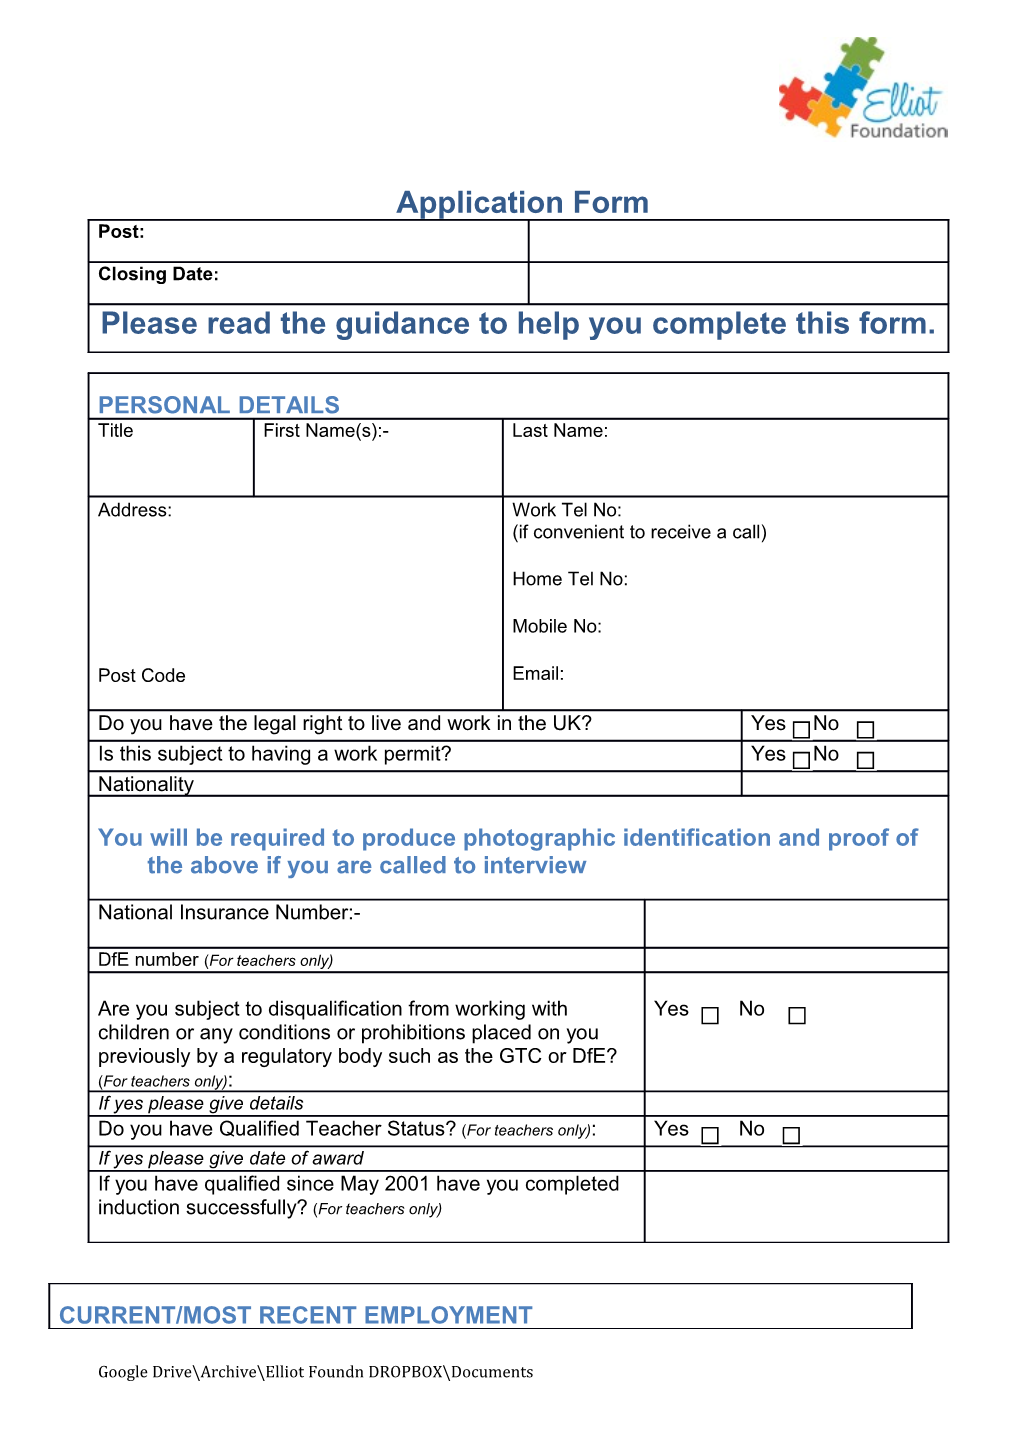 Please Read the Guidance to Help You Complete This Form